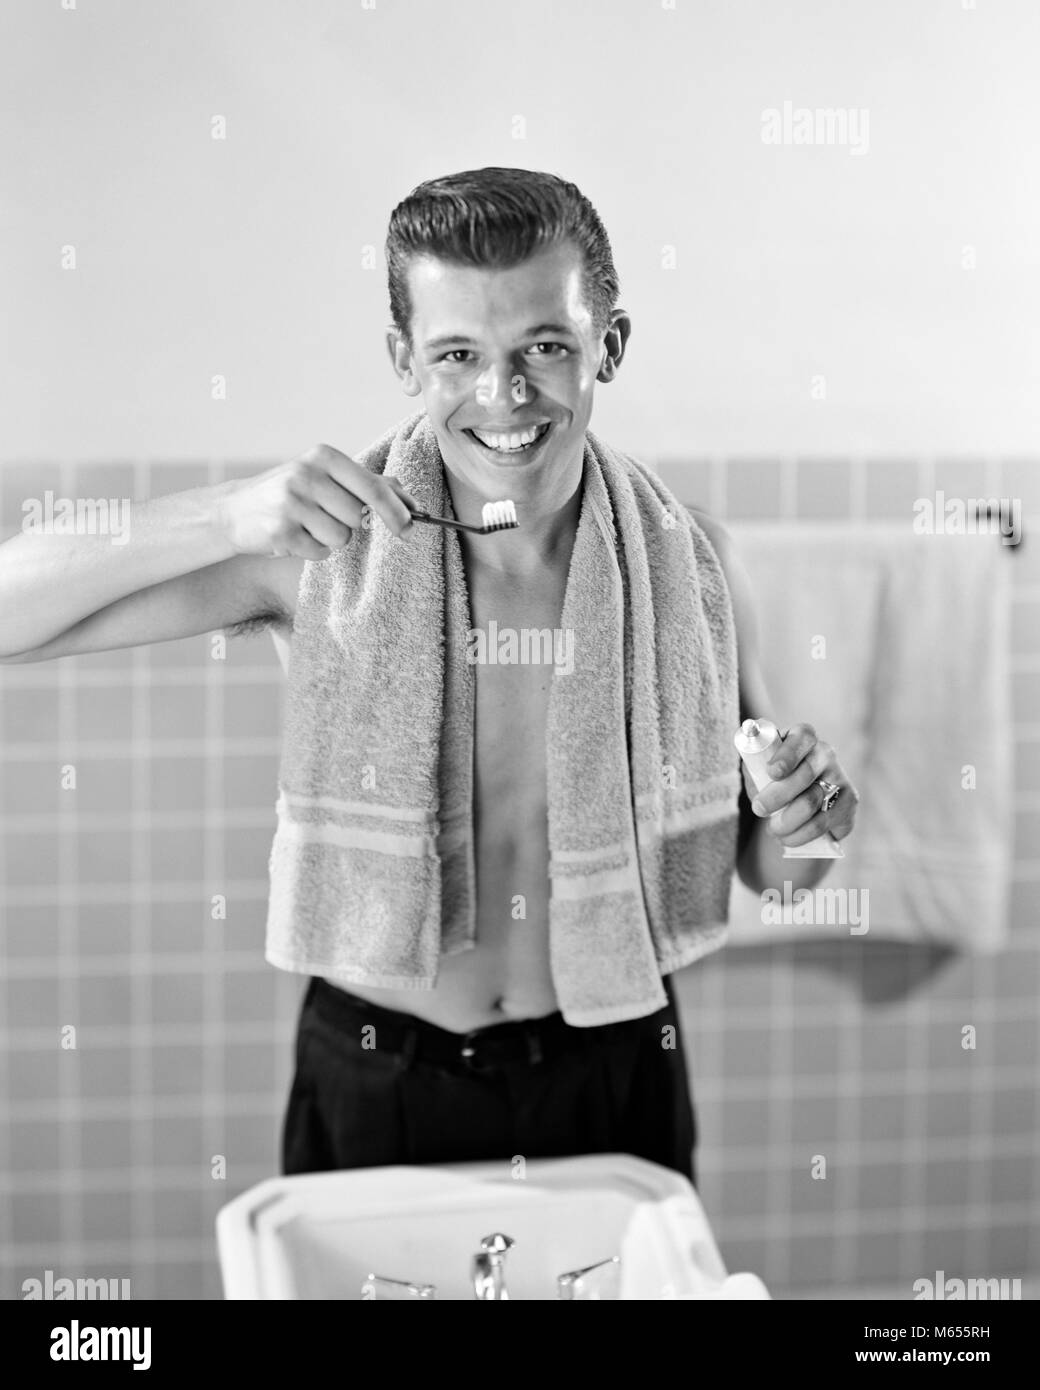 1950s SMILING TEENAGED BOY STANDING AT BATHROOM SINK BRUSHING TEETH LOOKING AT CAMERA - asp x16767 CAM001 HARS EYE CONTACT 16-17 YEARS GROOMING TOOTHBRUSH HAPPINESS TILE 18-19 YEARS HYGIENE GROWTH SMILES TEENAGED JUVENILES MALES YOUNG ADULT MAN B&W BLACK AND WHITE CAUCASIAN ETHNICITY DENTAL CARE DENTAL HEALTH GOOD GROOMING LOOKING AT CAMERA LOOKING INTO MIRROR OLD FASHIONED PERSONS TOOTHPASTE Stock Photo